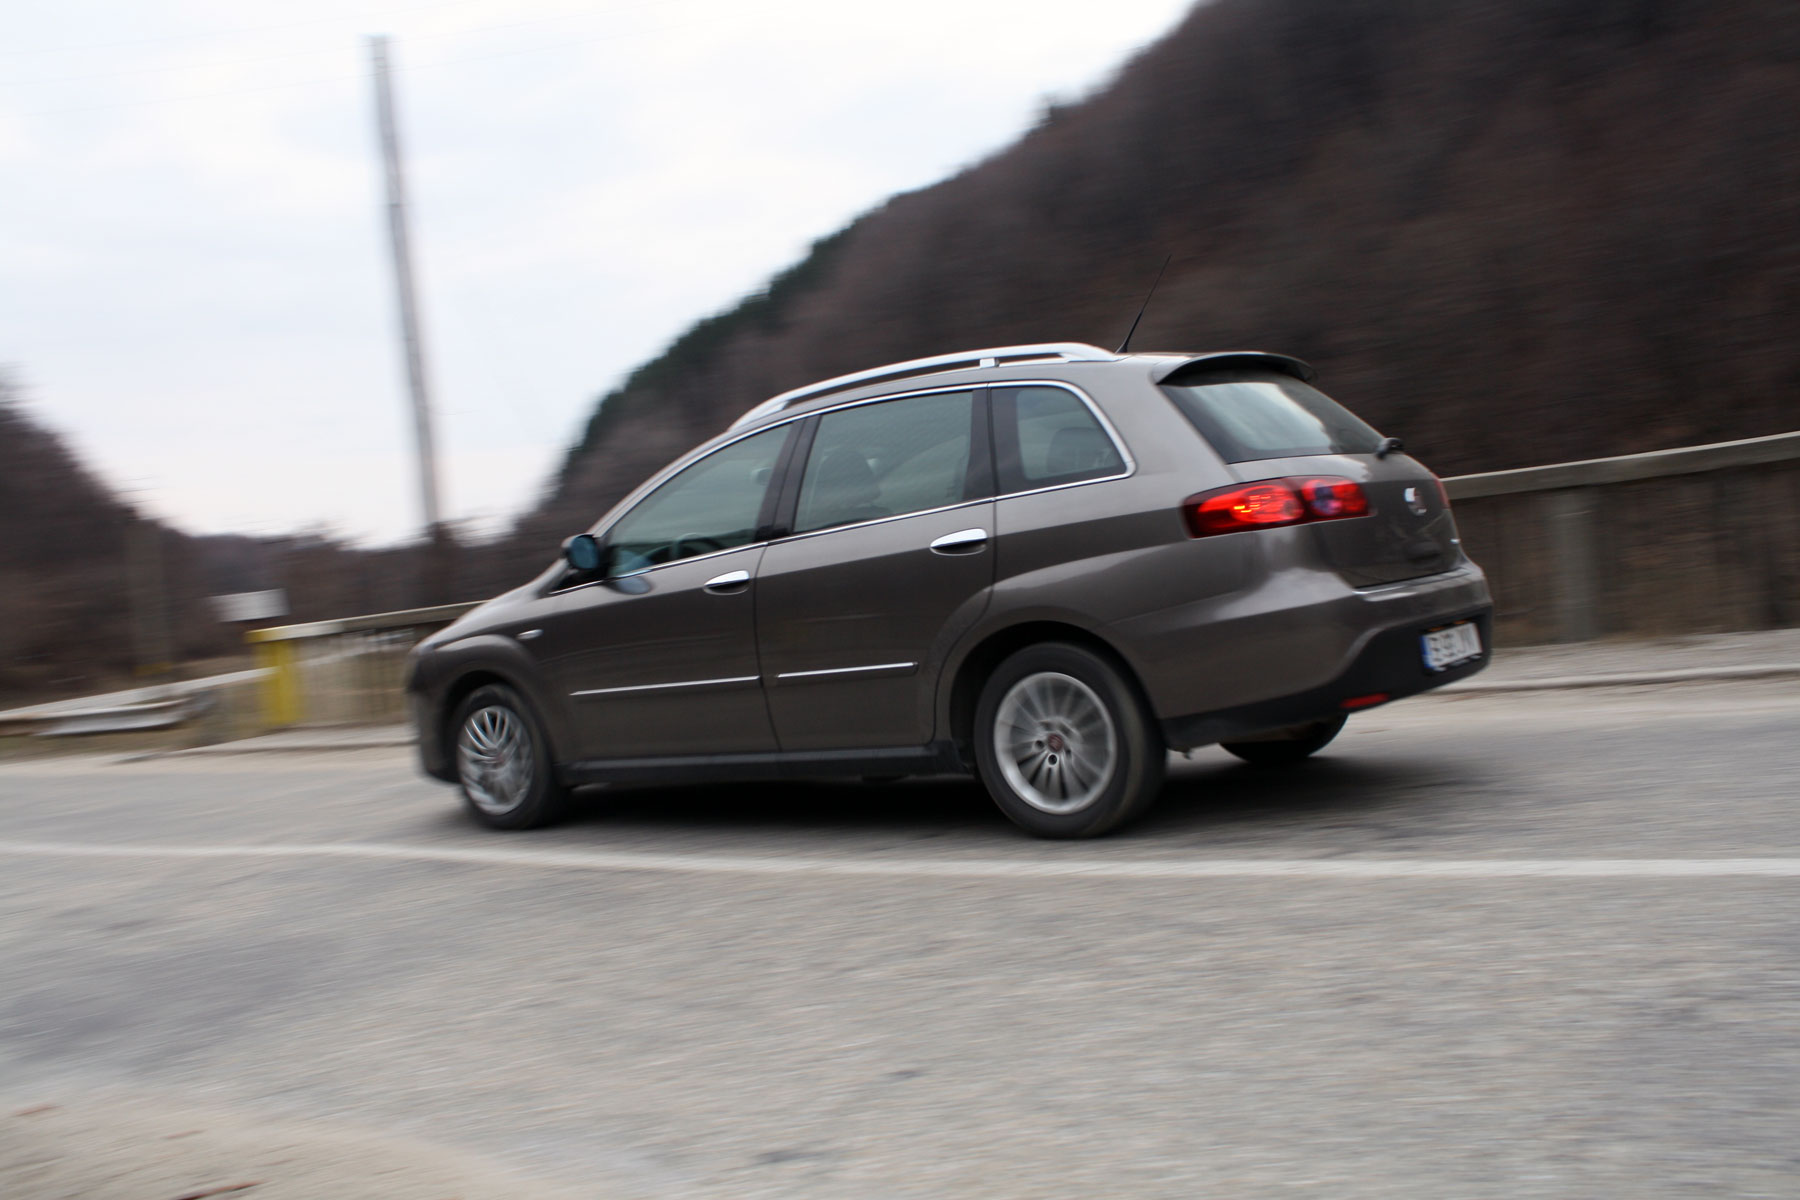 Fiat Croma - lateral